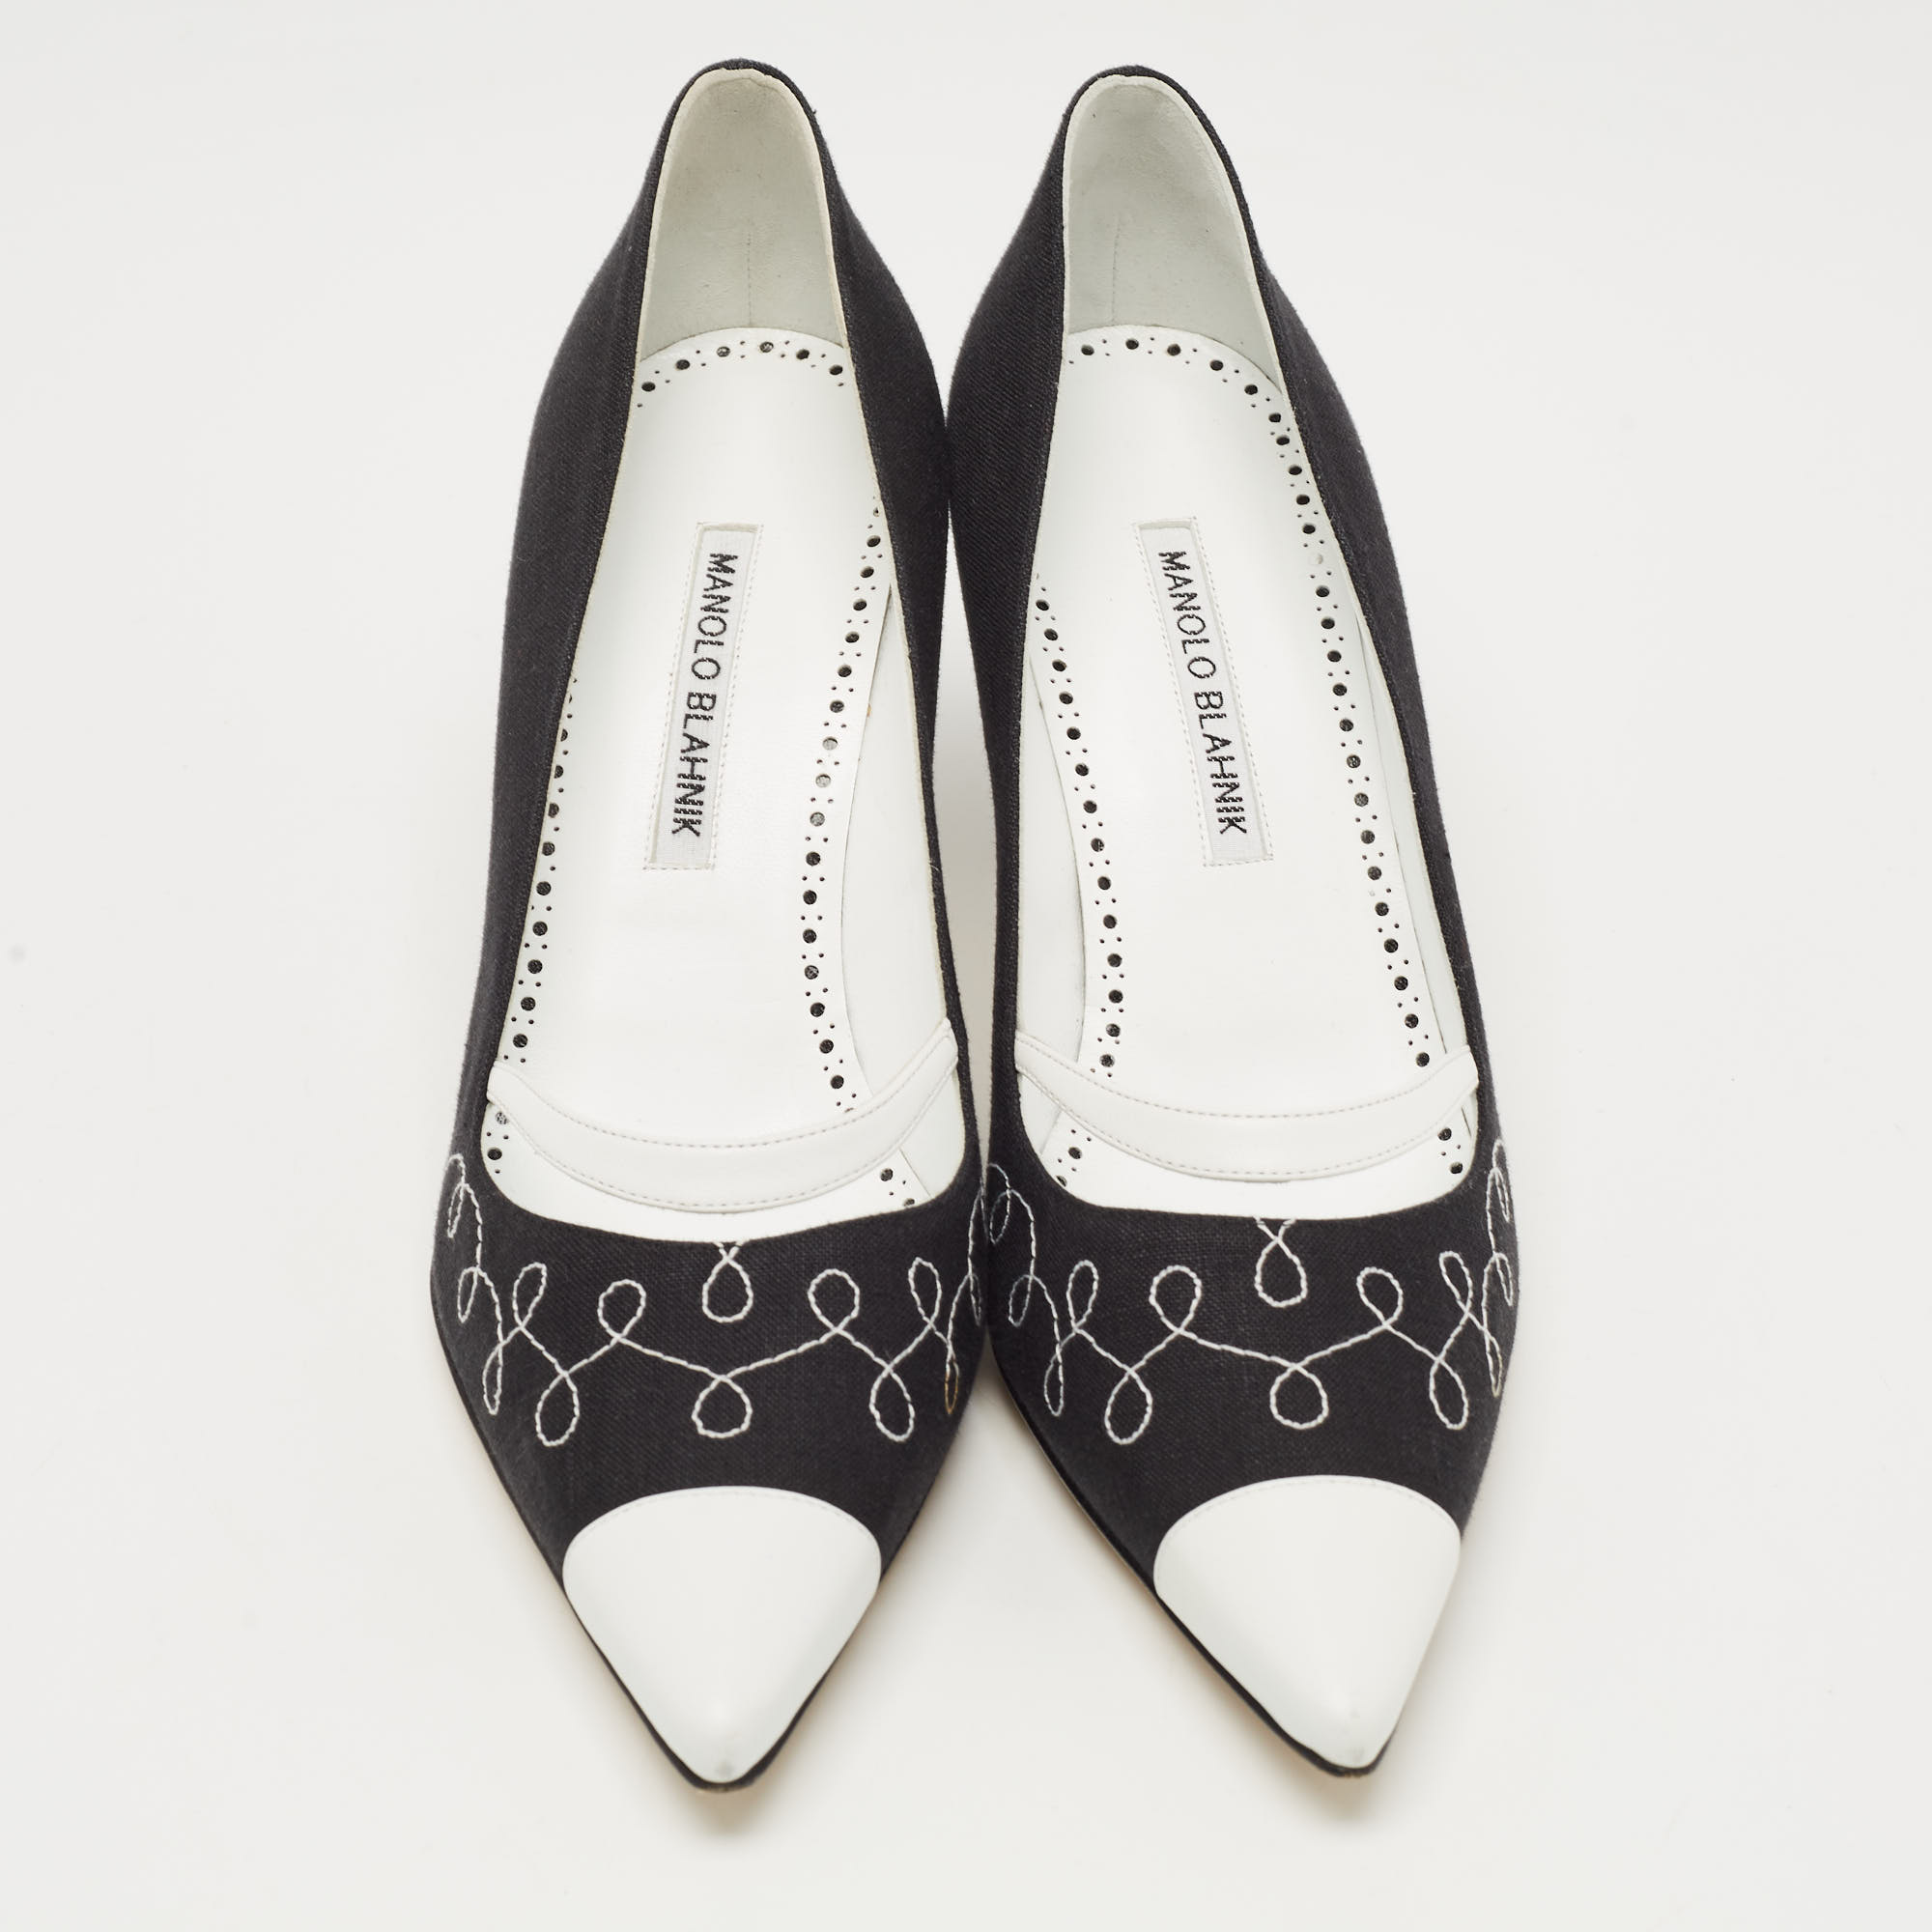 Manolo Blahnik Black/White Canvas And Leather Pointed Toe Pumps Size 39.5